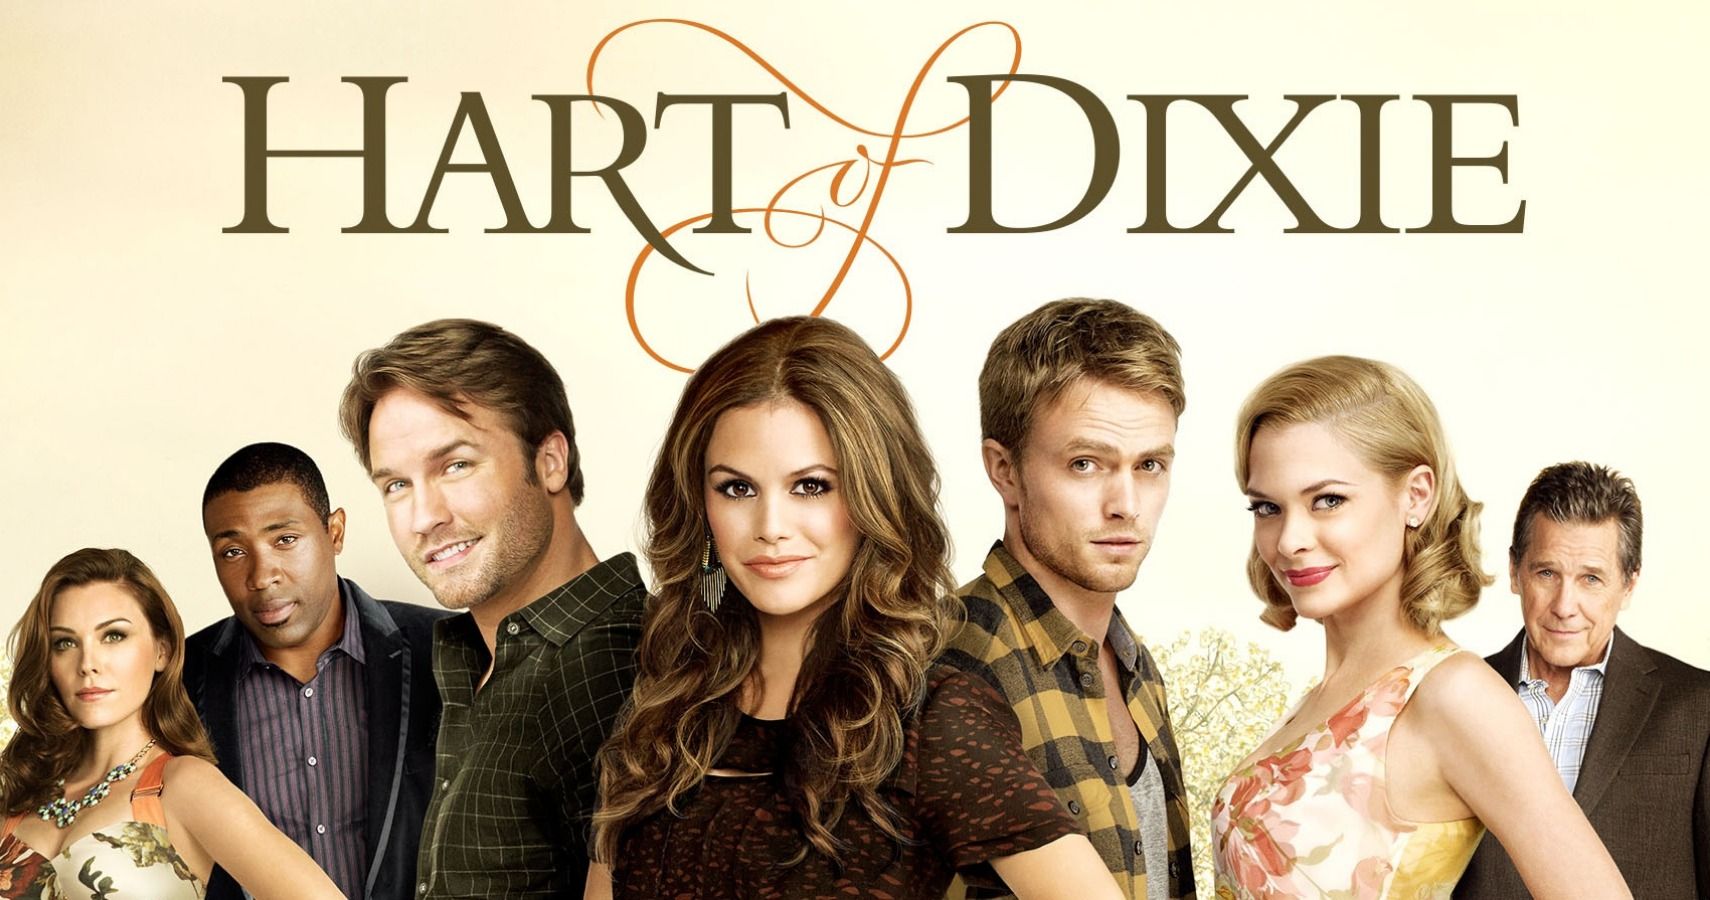 The 10 Worst Episodes Of Hart Of Dixie (According To IMDb)